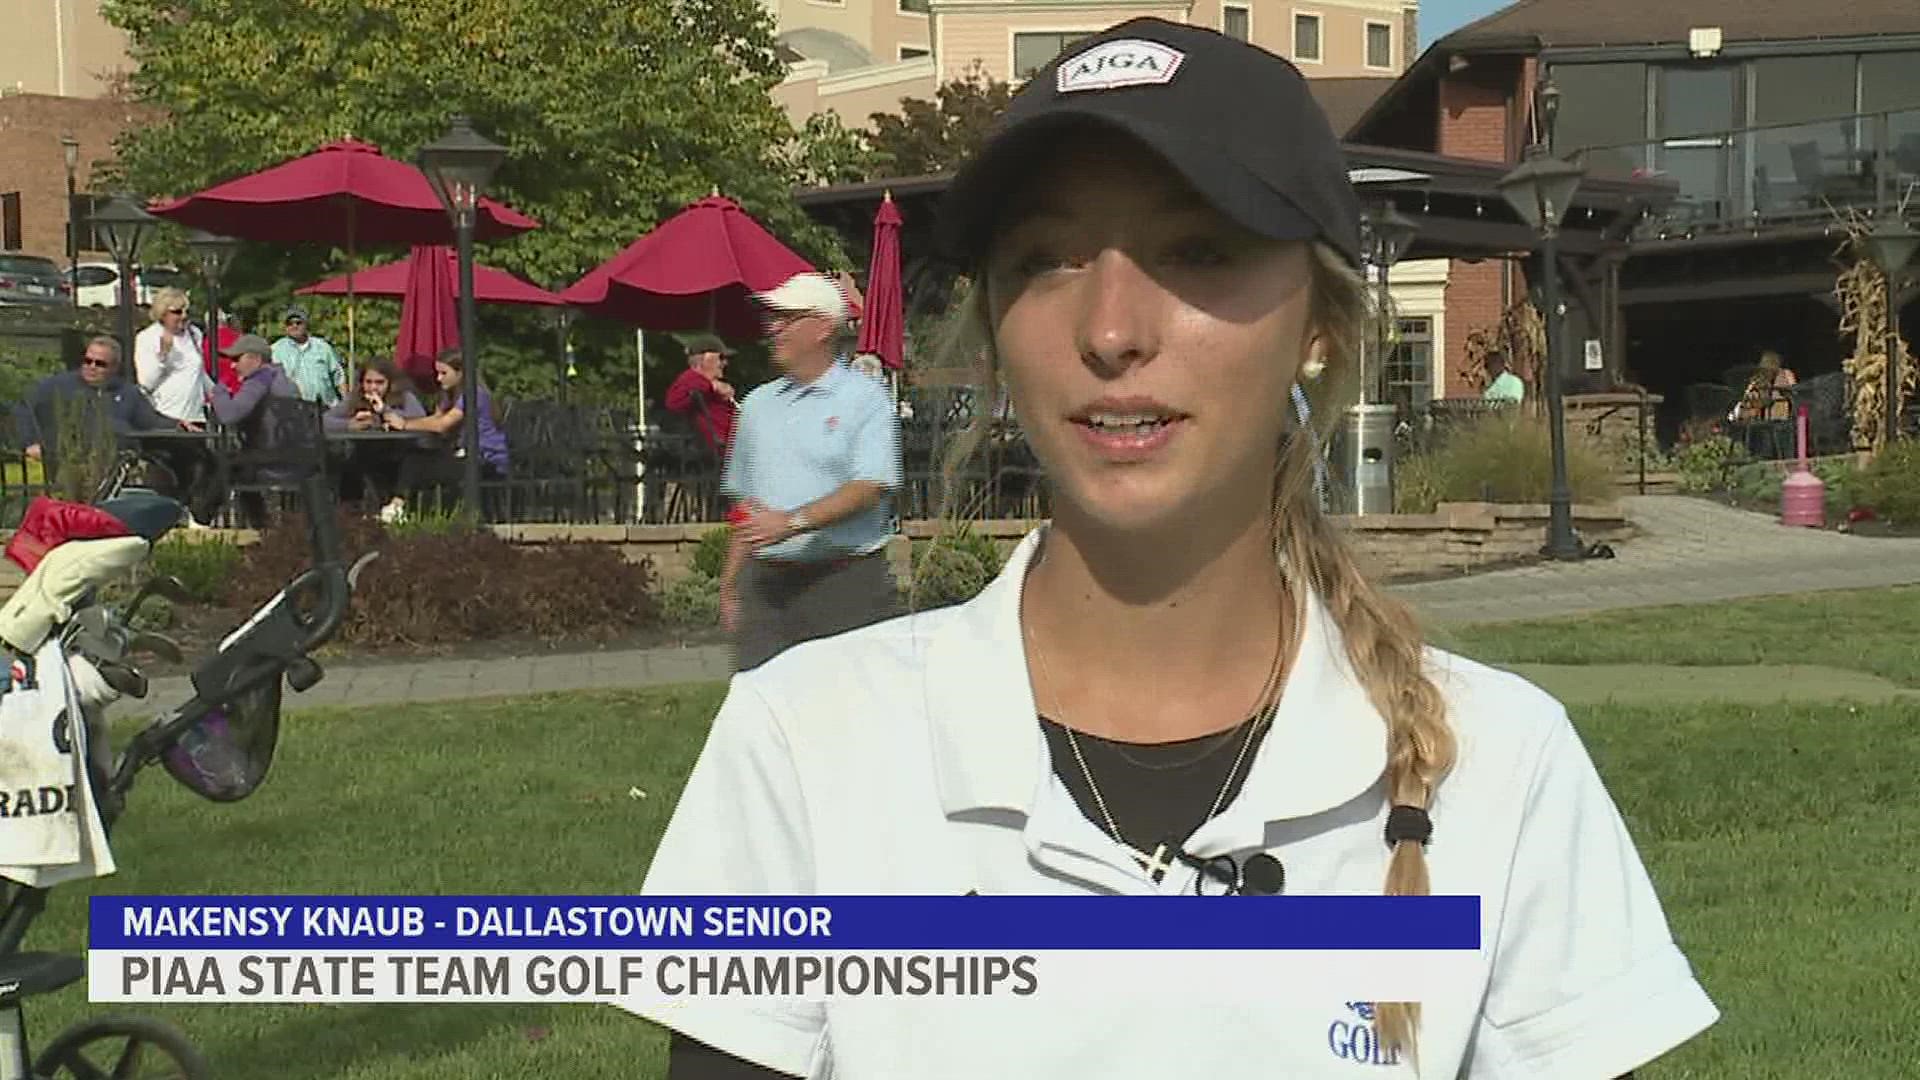 We hear from a Dallastown and Boiling Springs golfer after their state championship rounds at Heritage Hills on Monday.